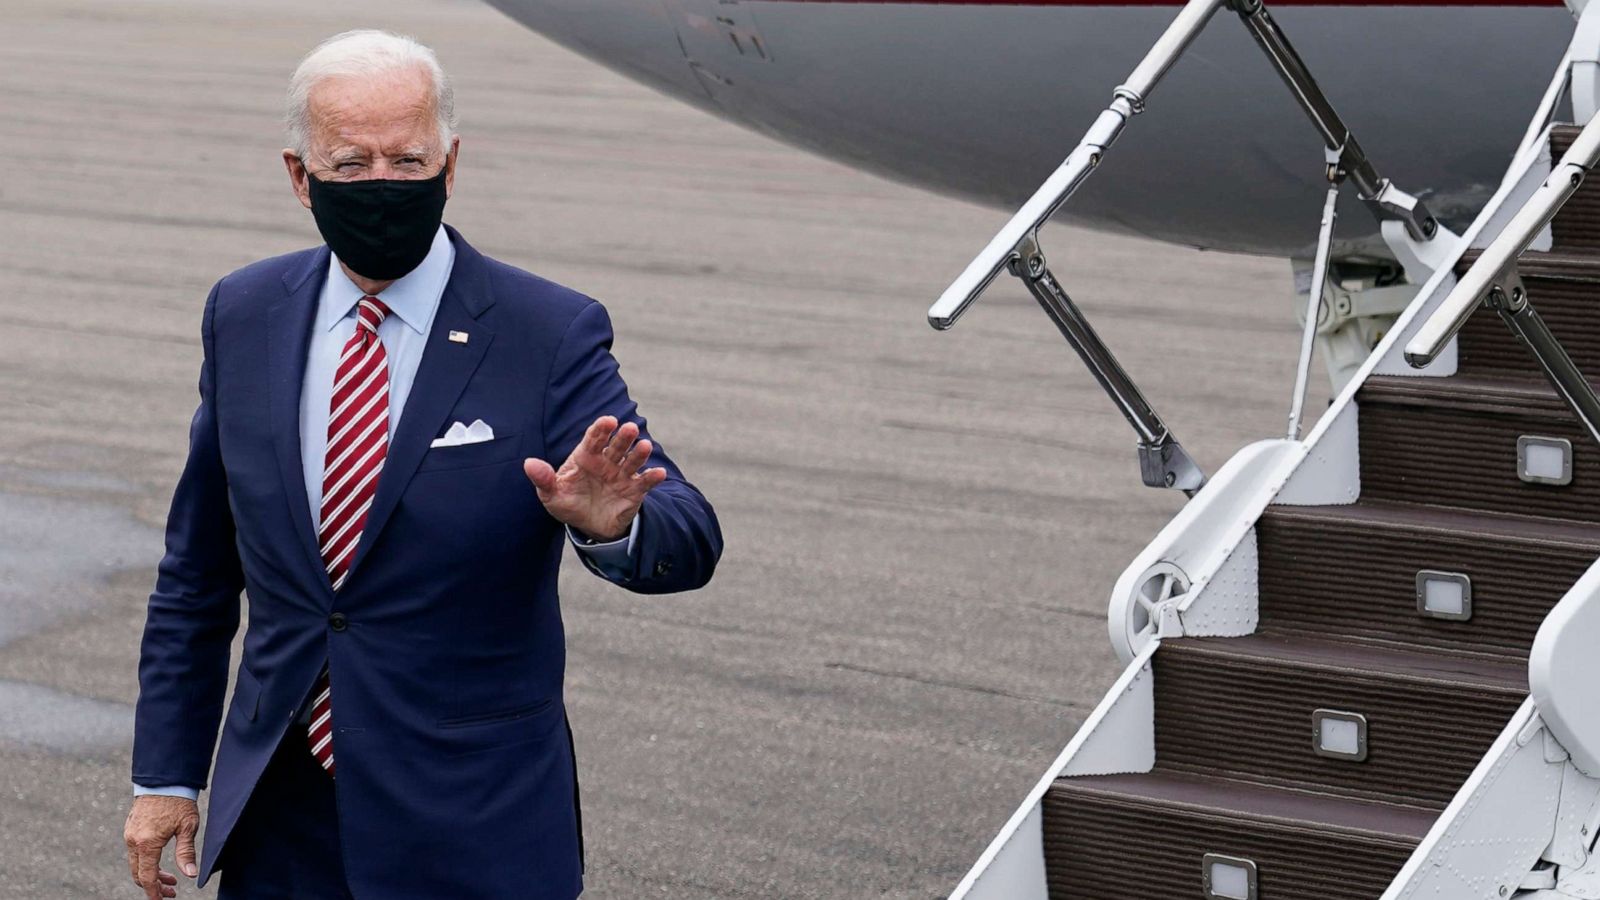 Biden campaign continues TV blitz with 2 ads, including from former Trump voter - ABC News